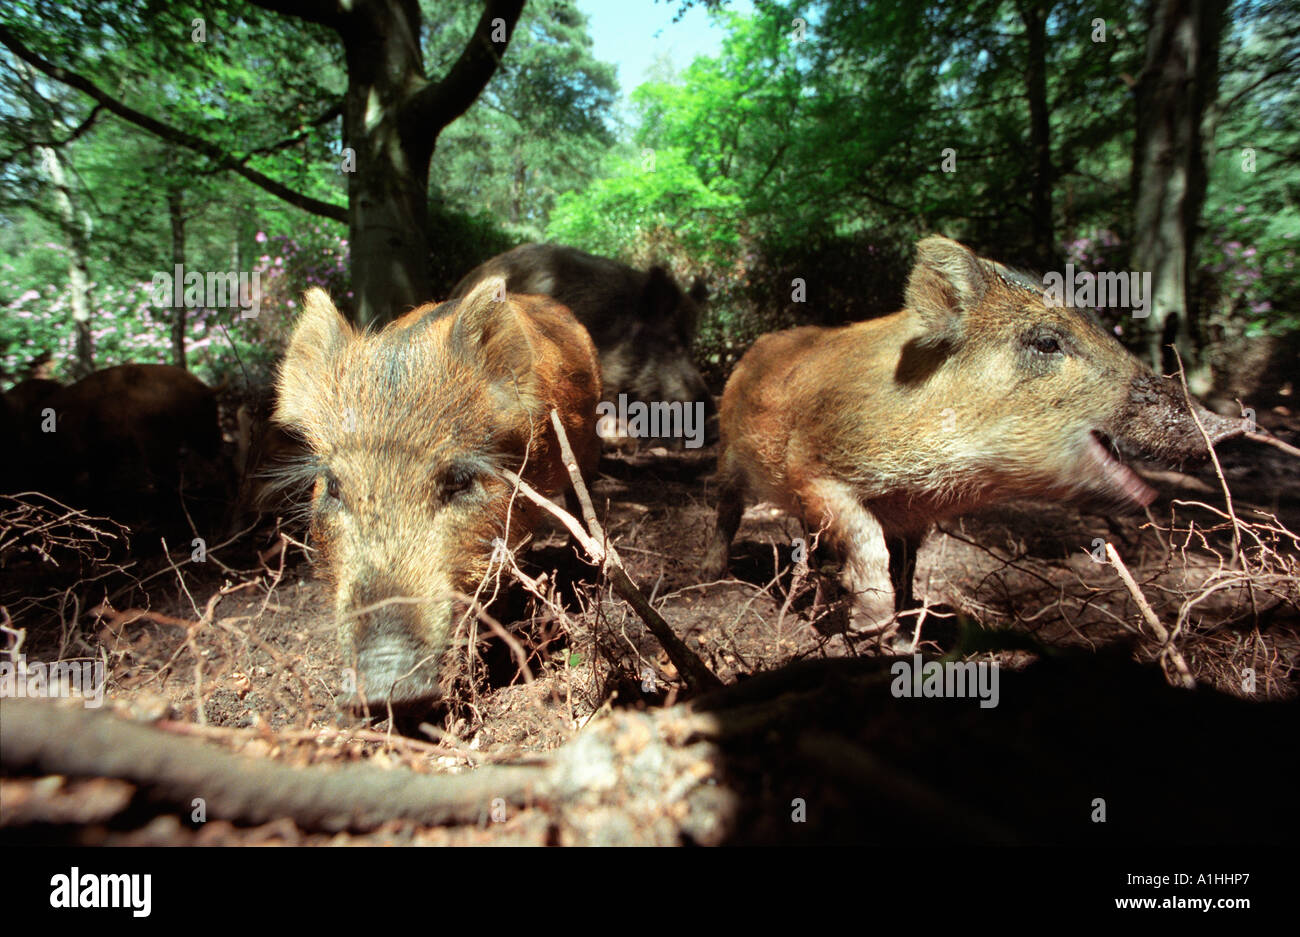 Two young Wild Boars grubbing for food in woodland in Hampshire, England. Stock Photo